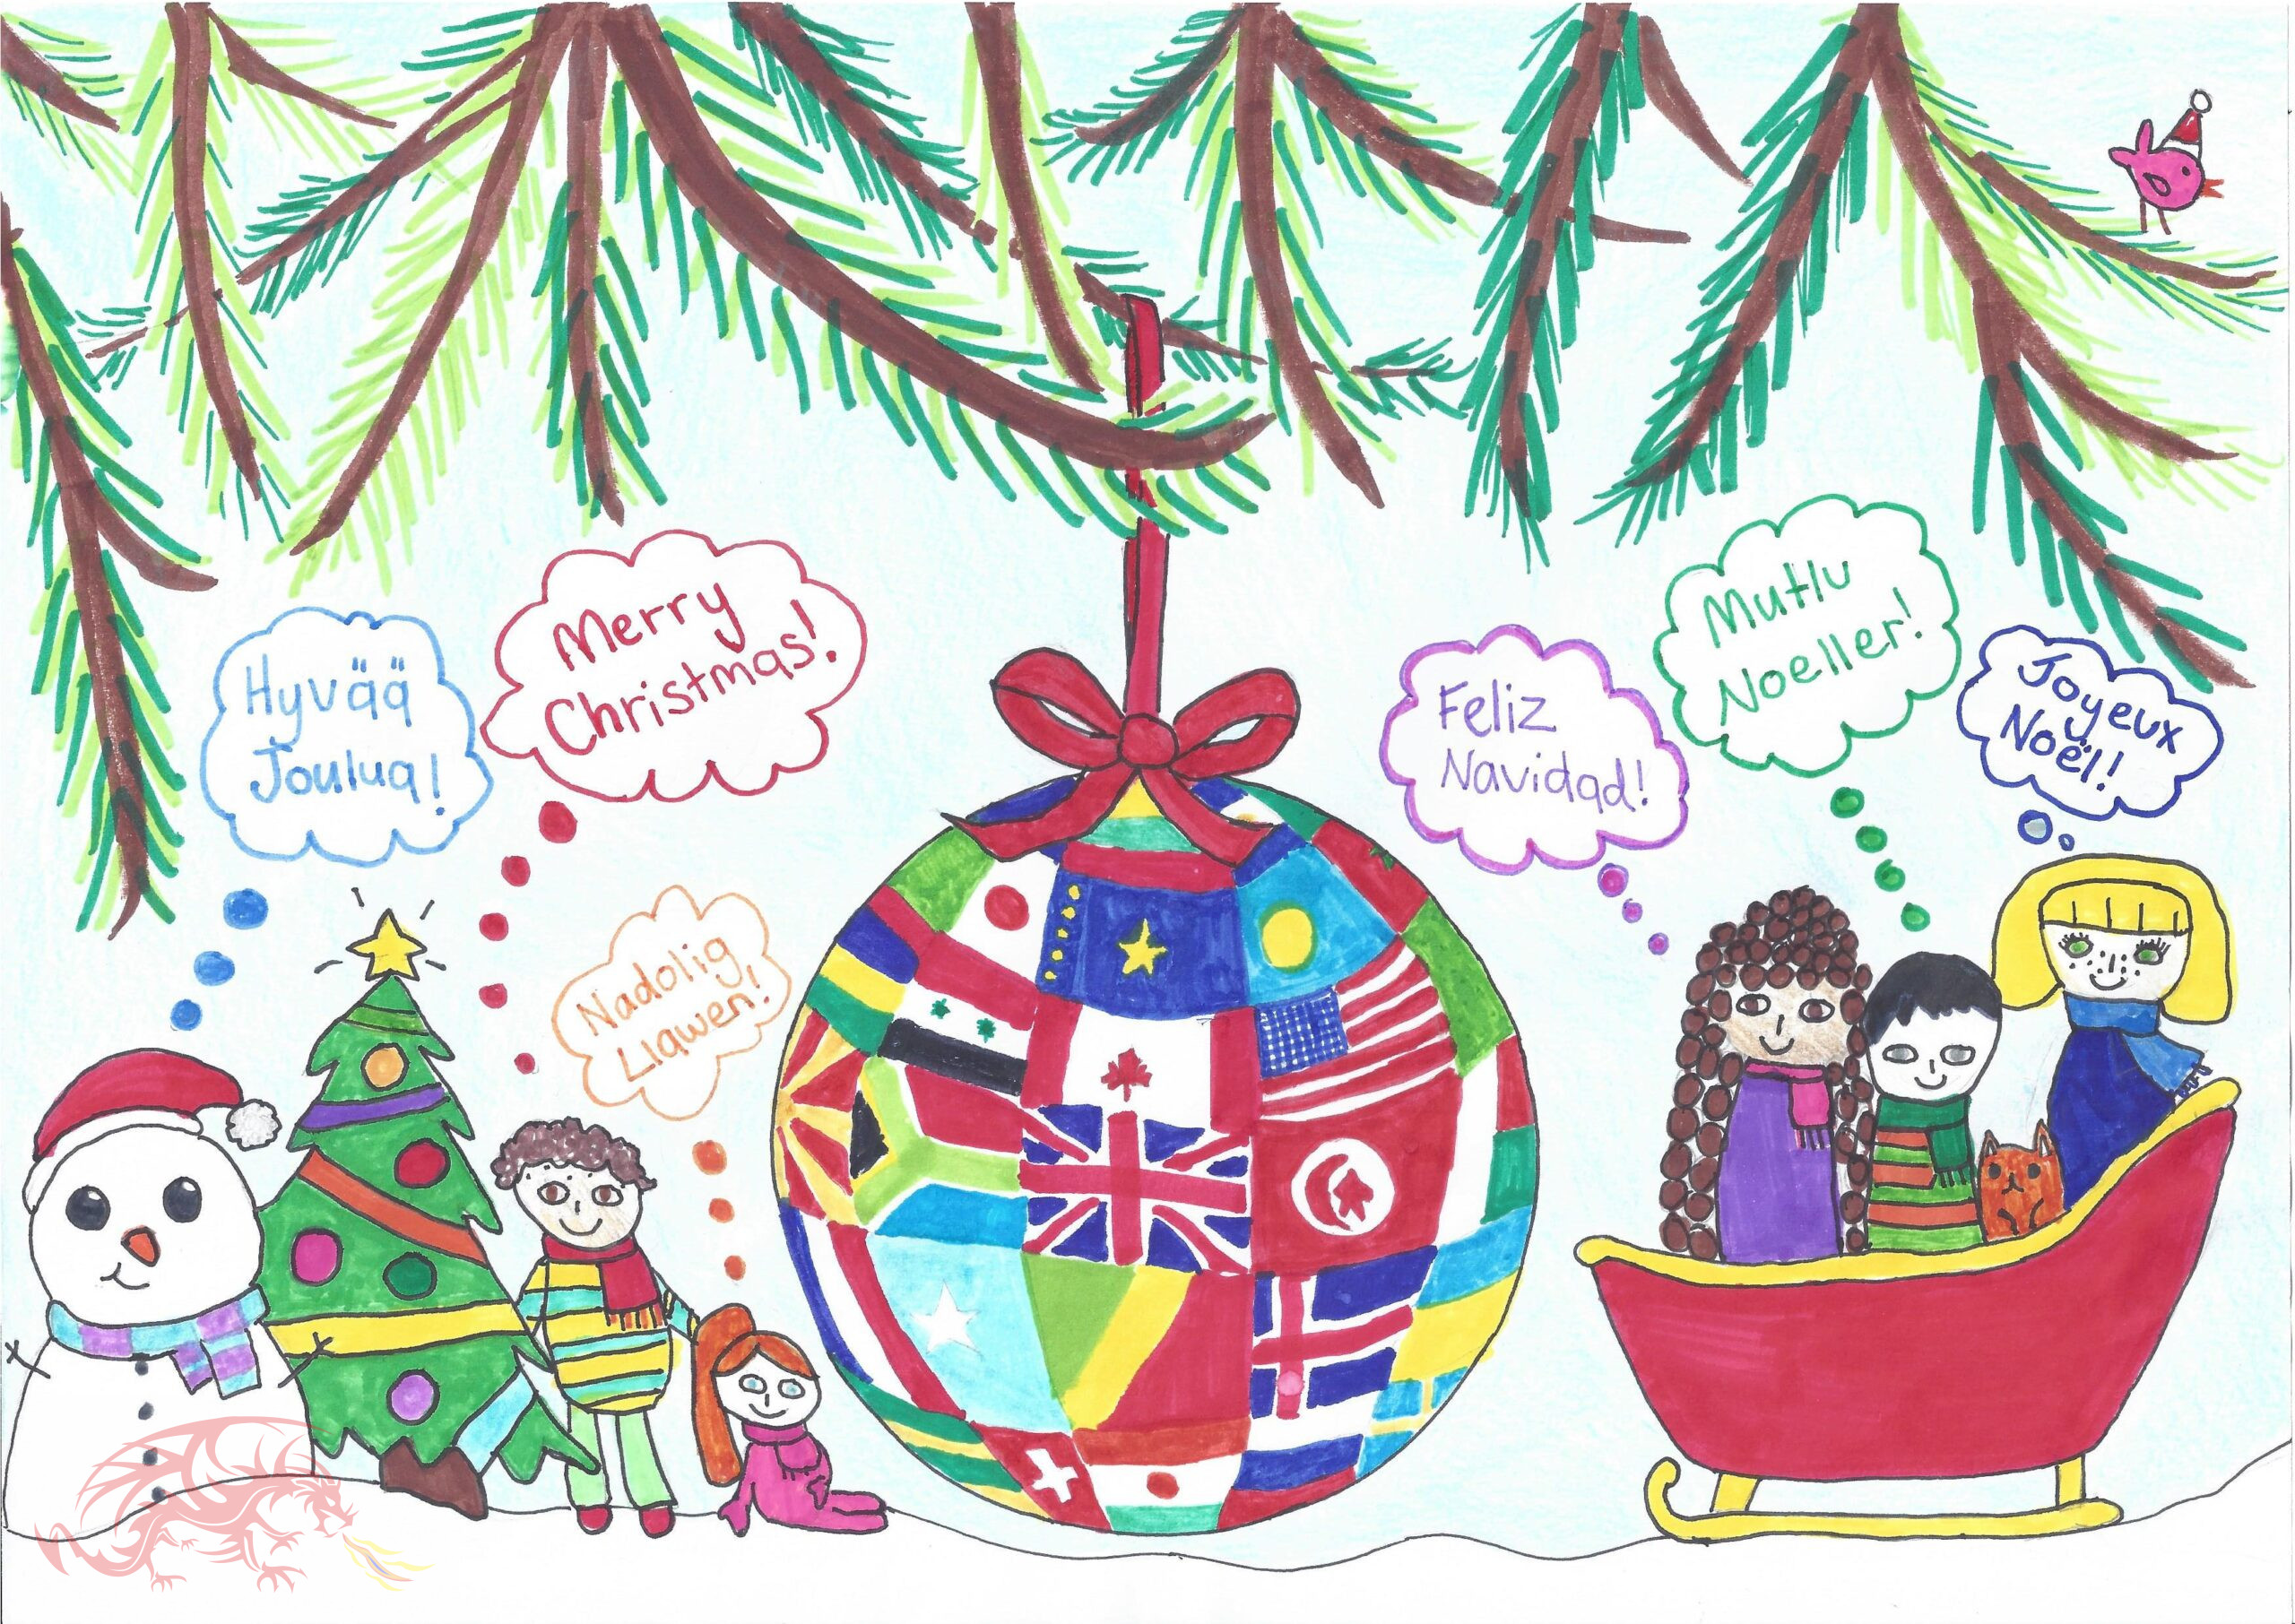 Llanelli MP and MS Christmas Card competition shows the talents of local pupils at their best